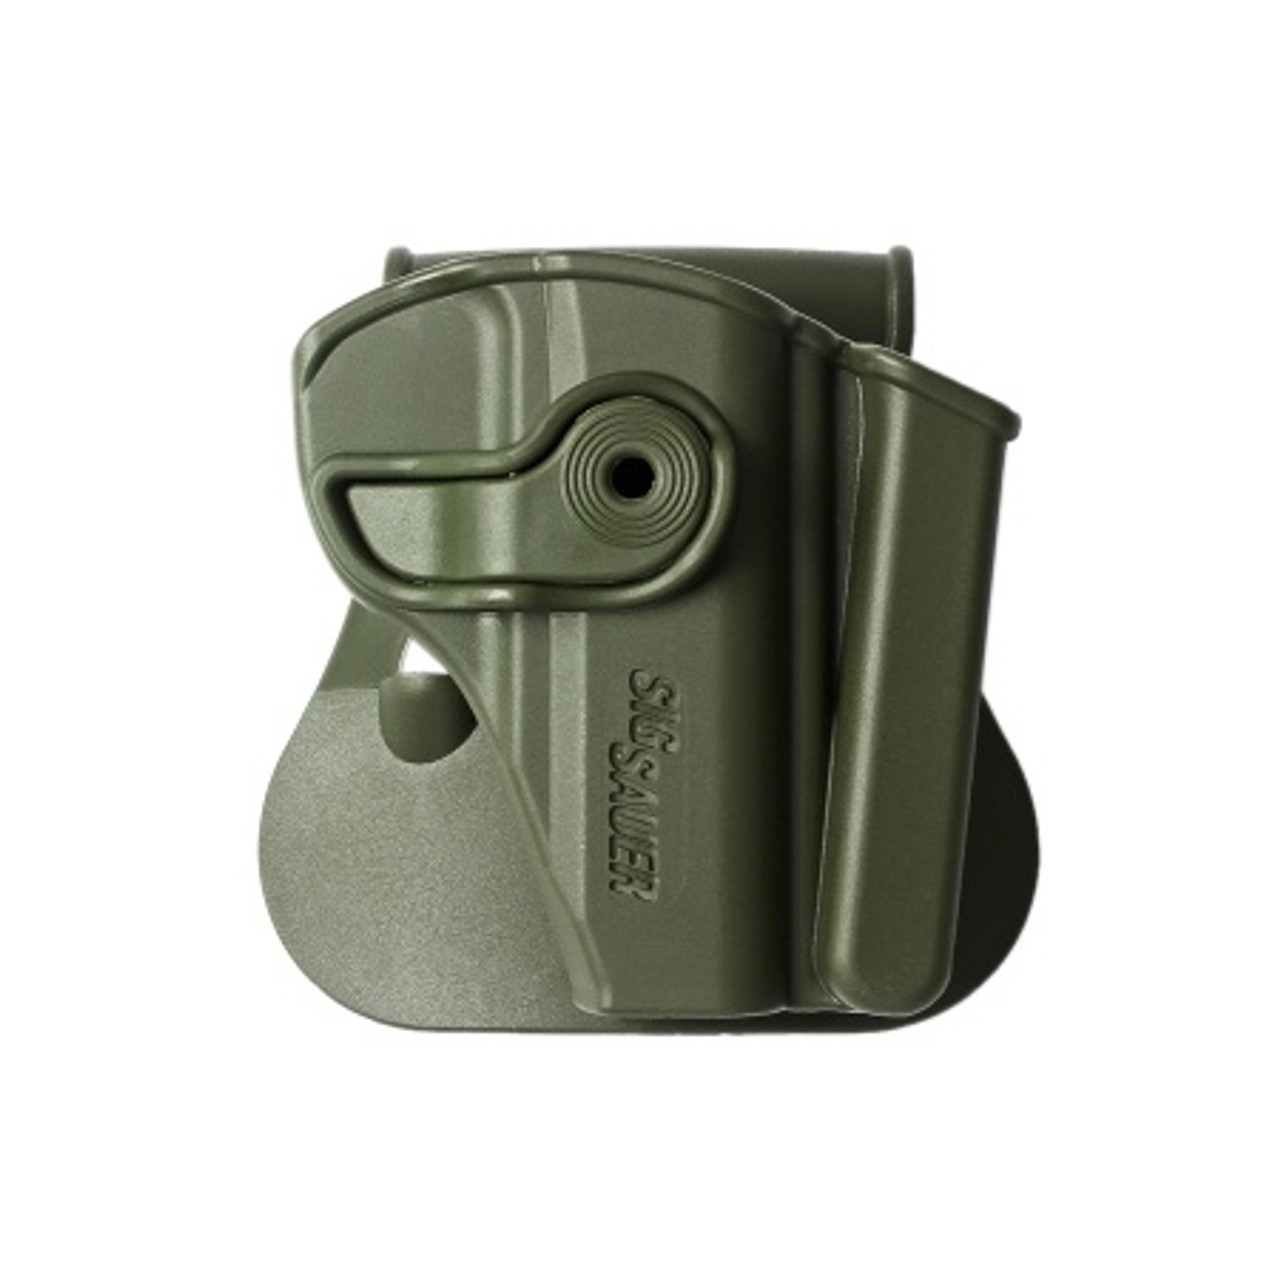 IMI-Z1230 Polymer Retention Paddle Holster with Integrated